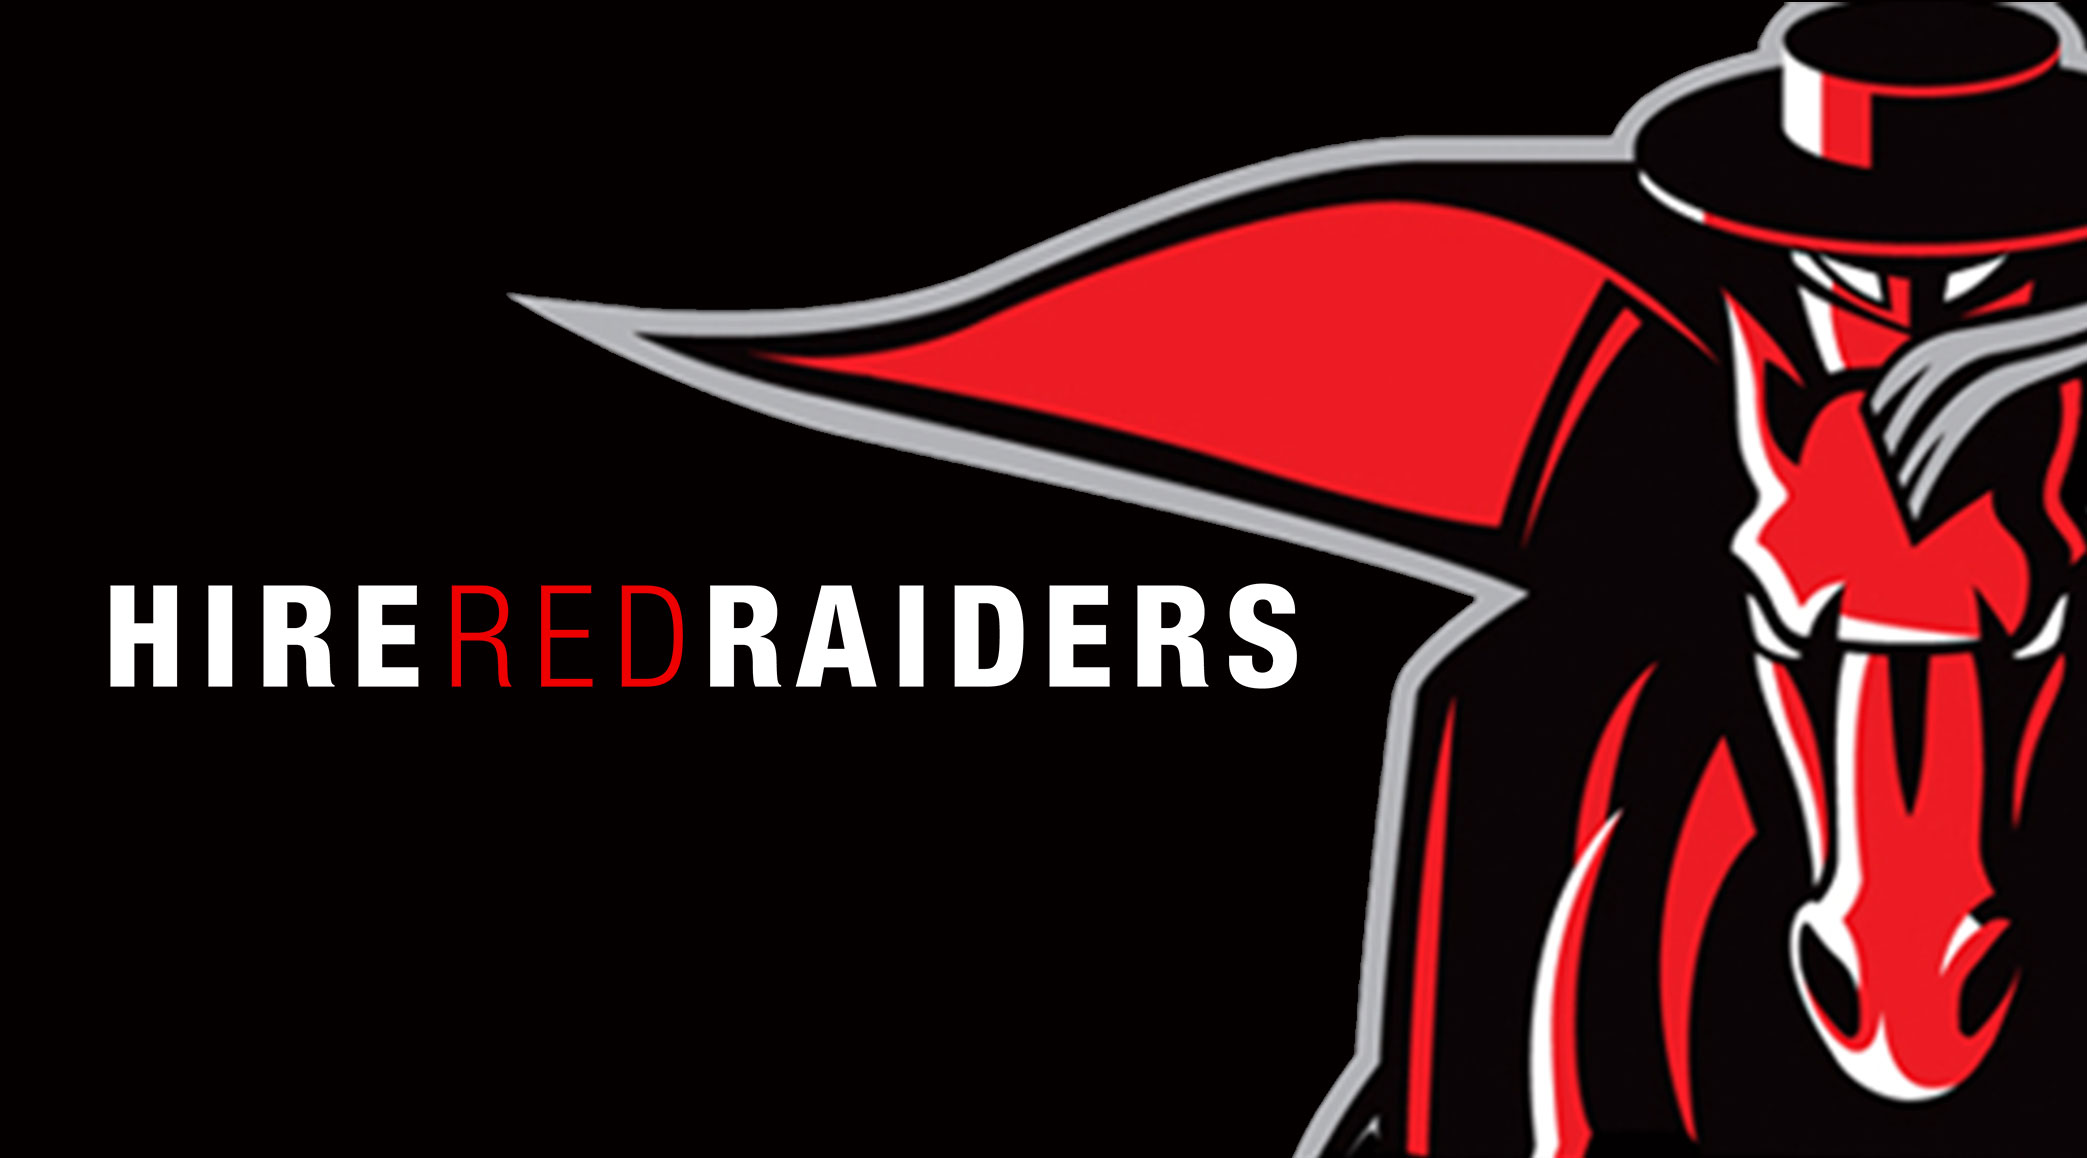 Post Internships and Full-Time Positions on Hire Red Raiders our Job Posting Board for Employers Specifically Seeking Texas Tech Students and Graduates